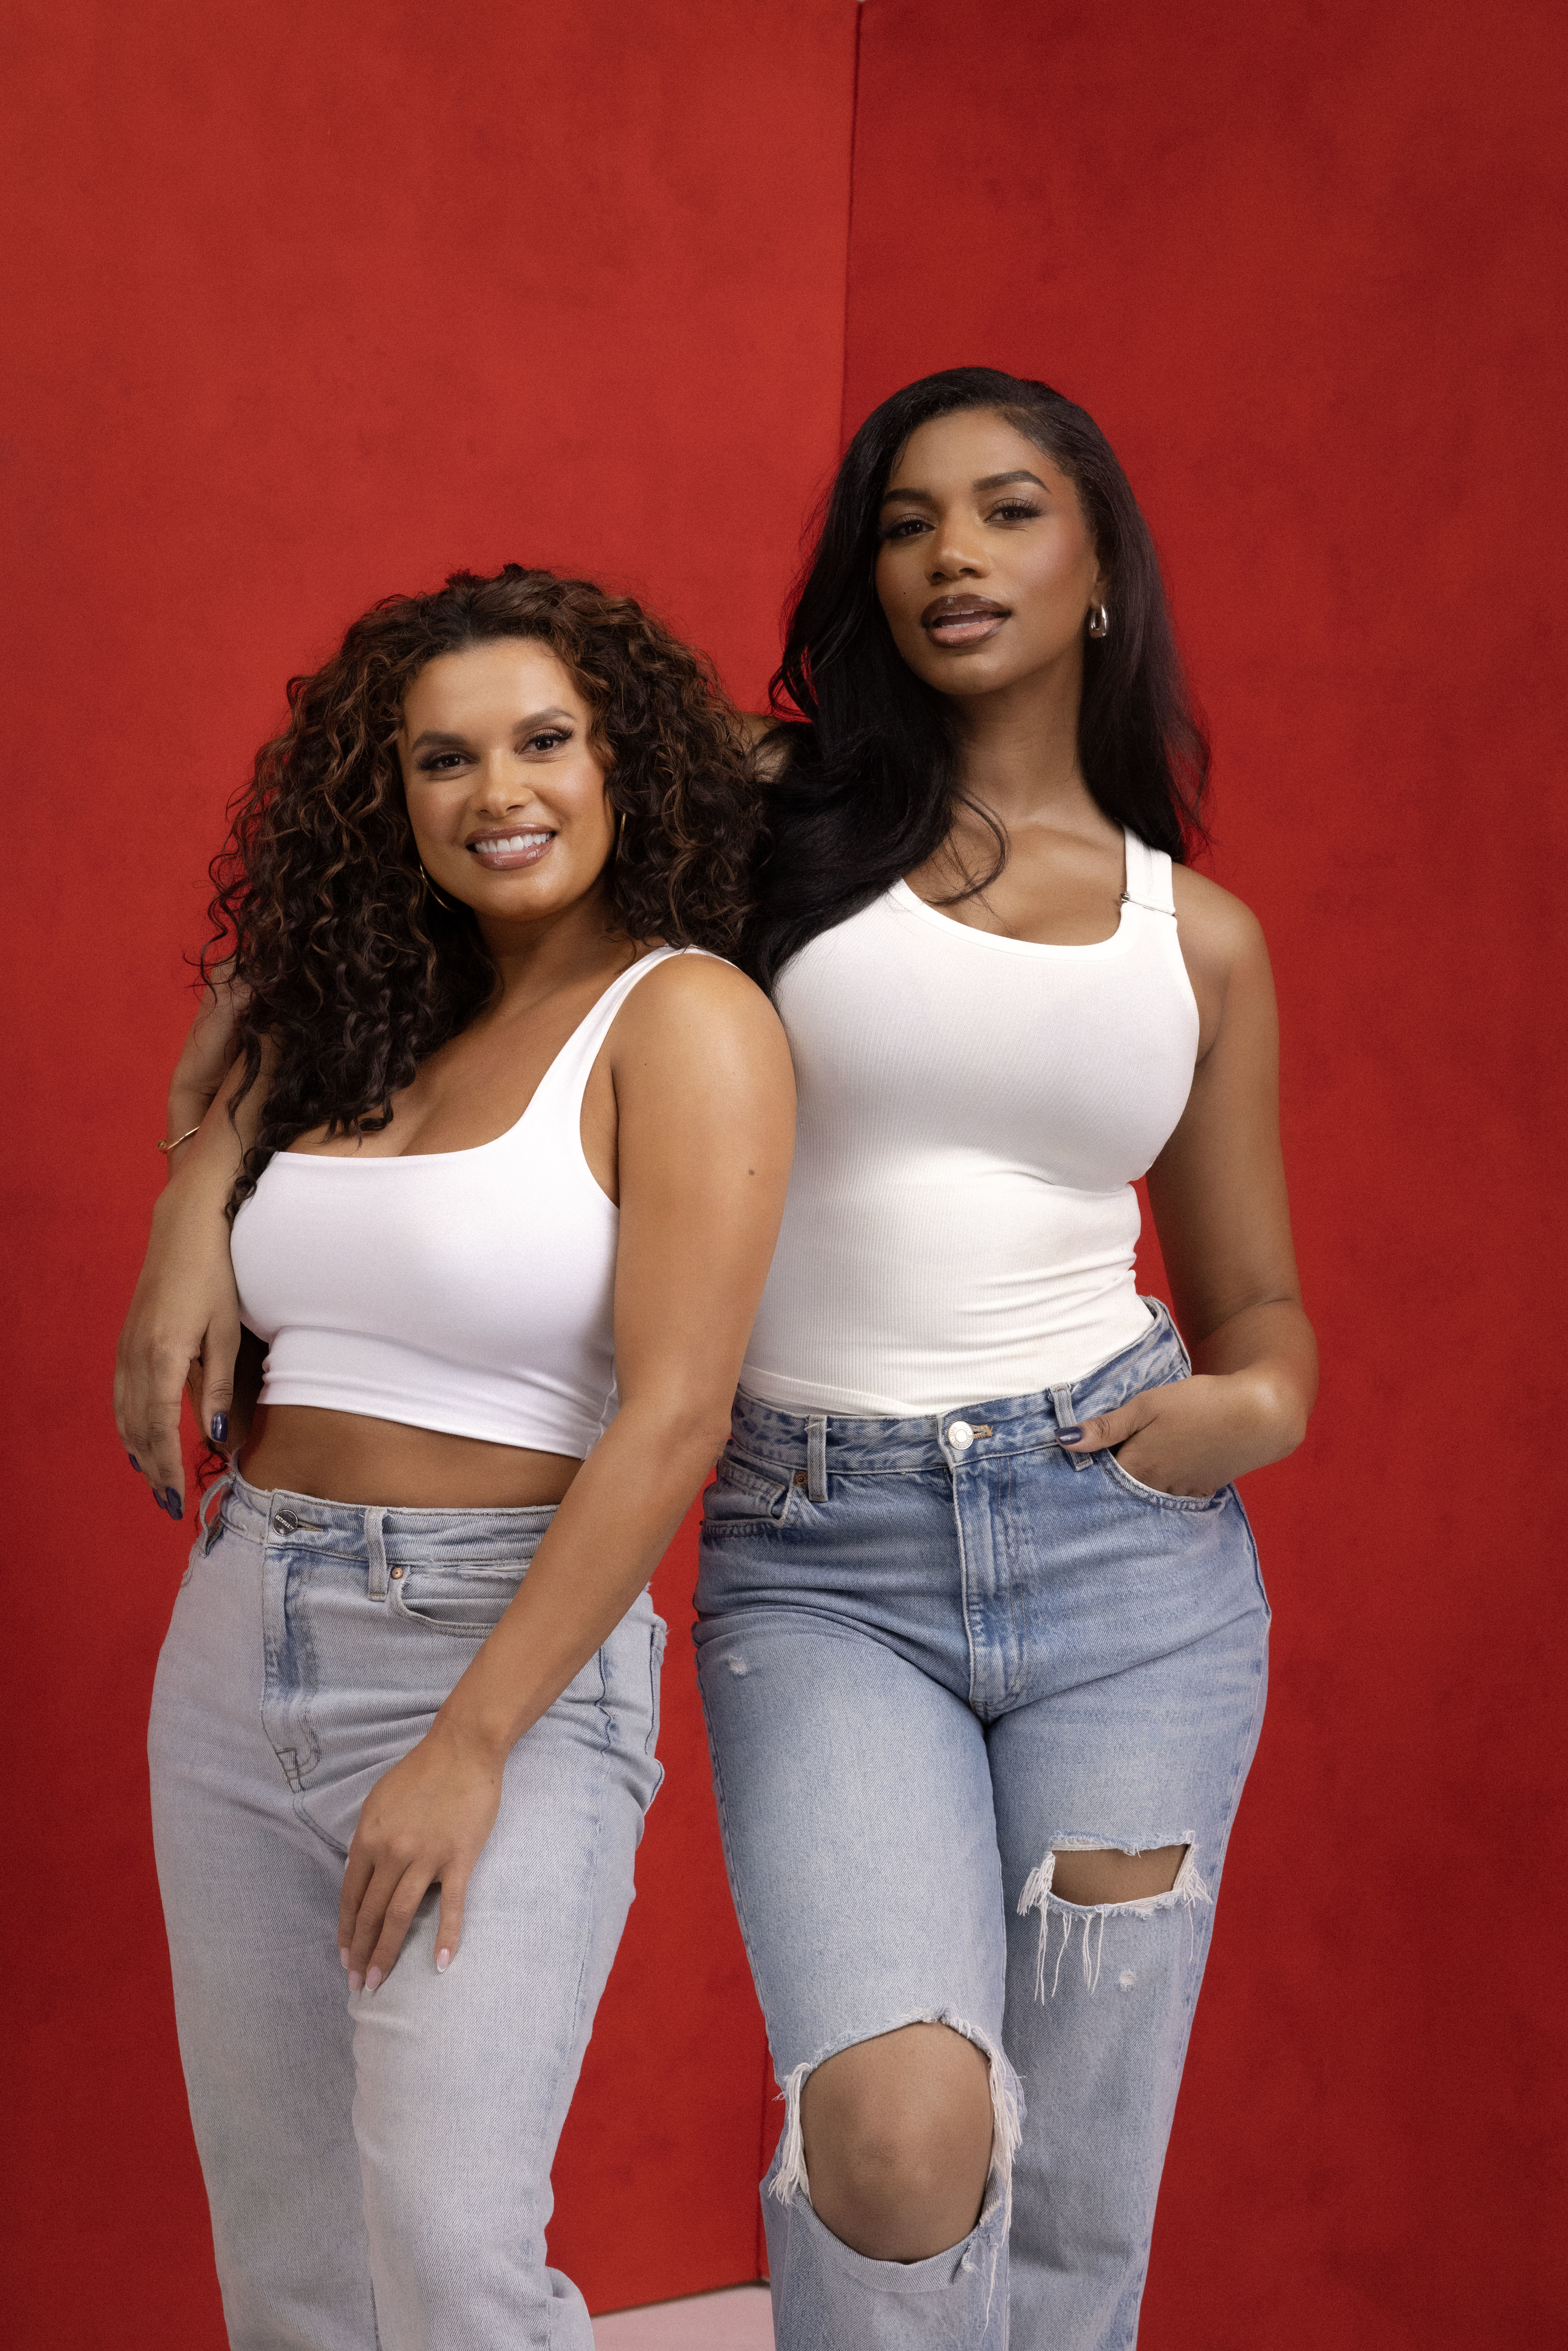 Two women posing in casual white tops and jeans against a red backdrop